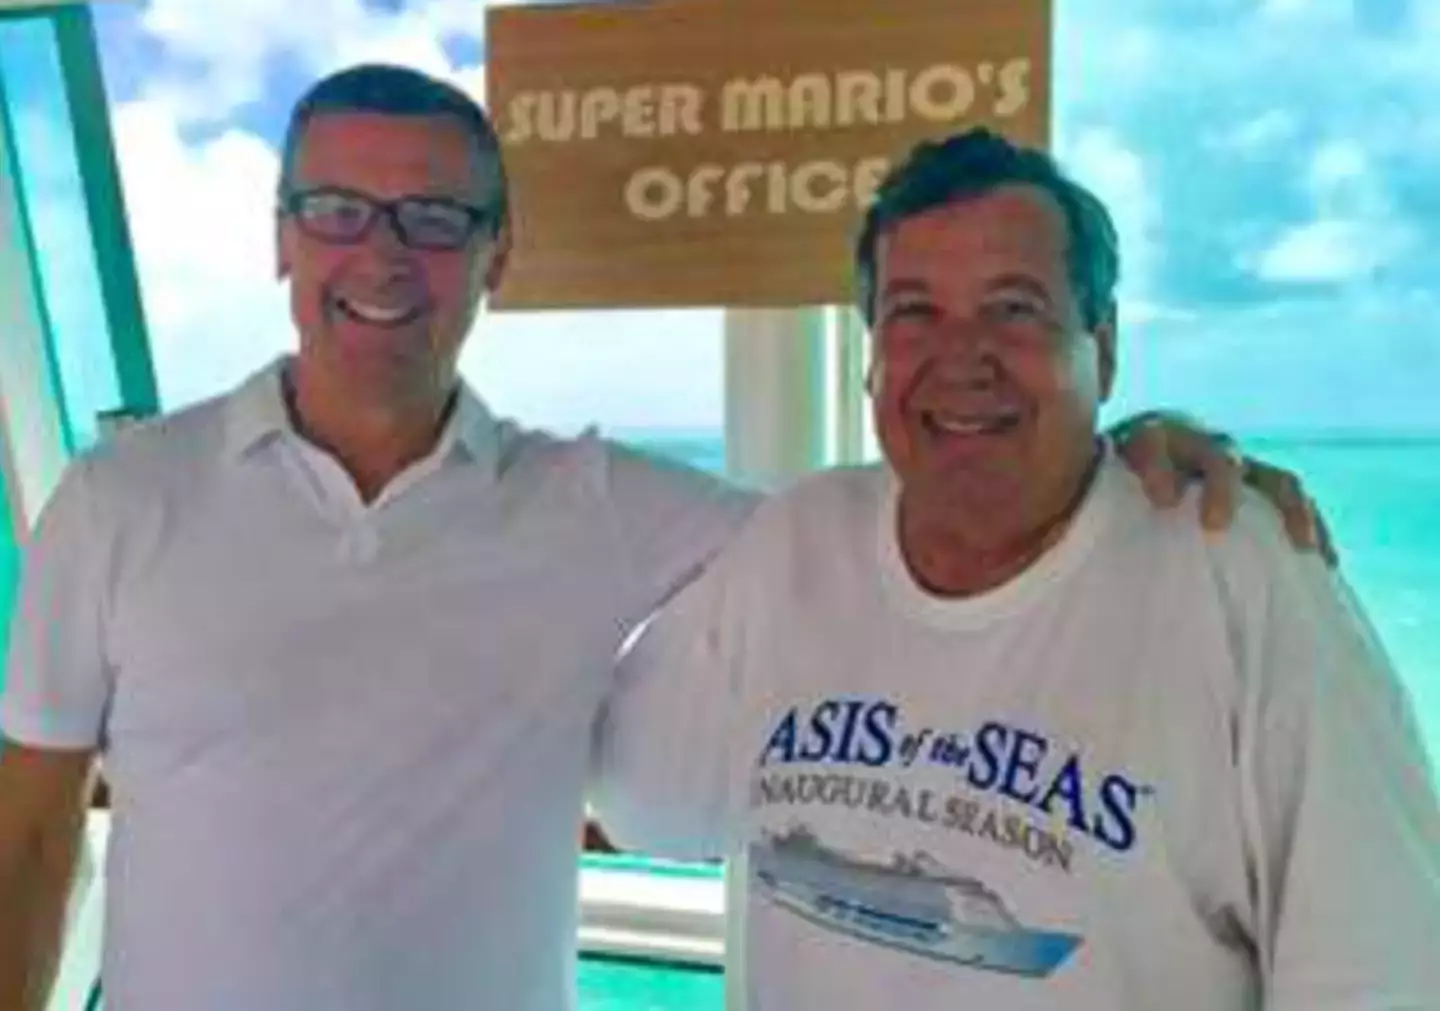 Mario is good friends with the staff onboard the Royal Caribbean ships.